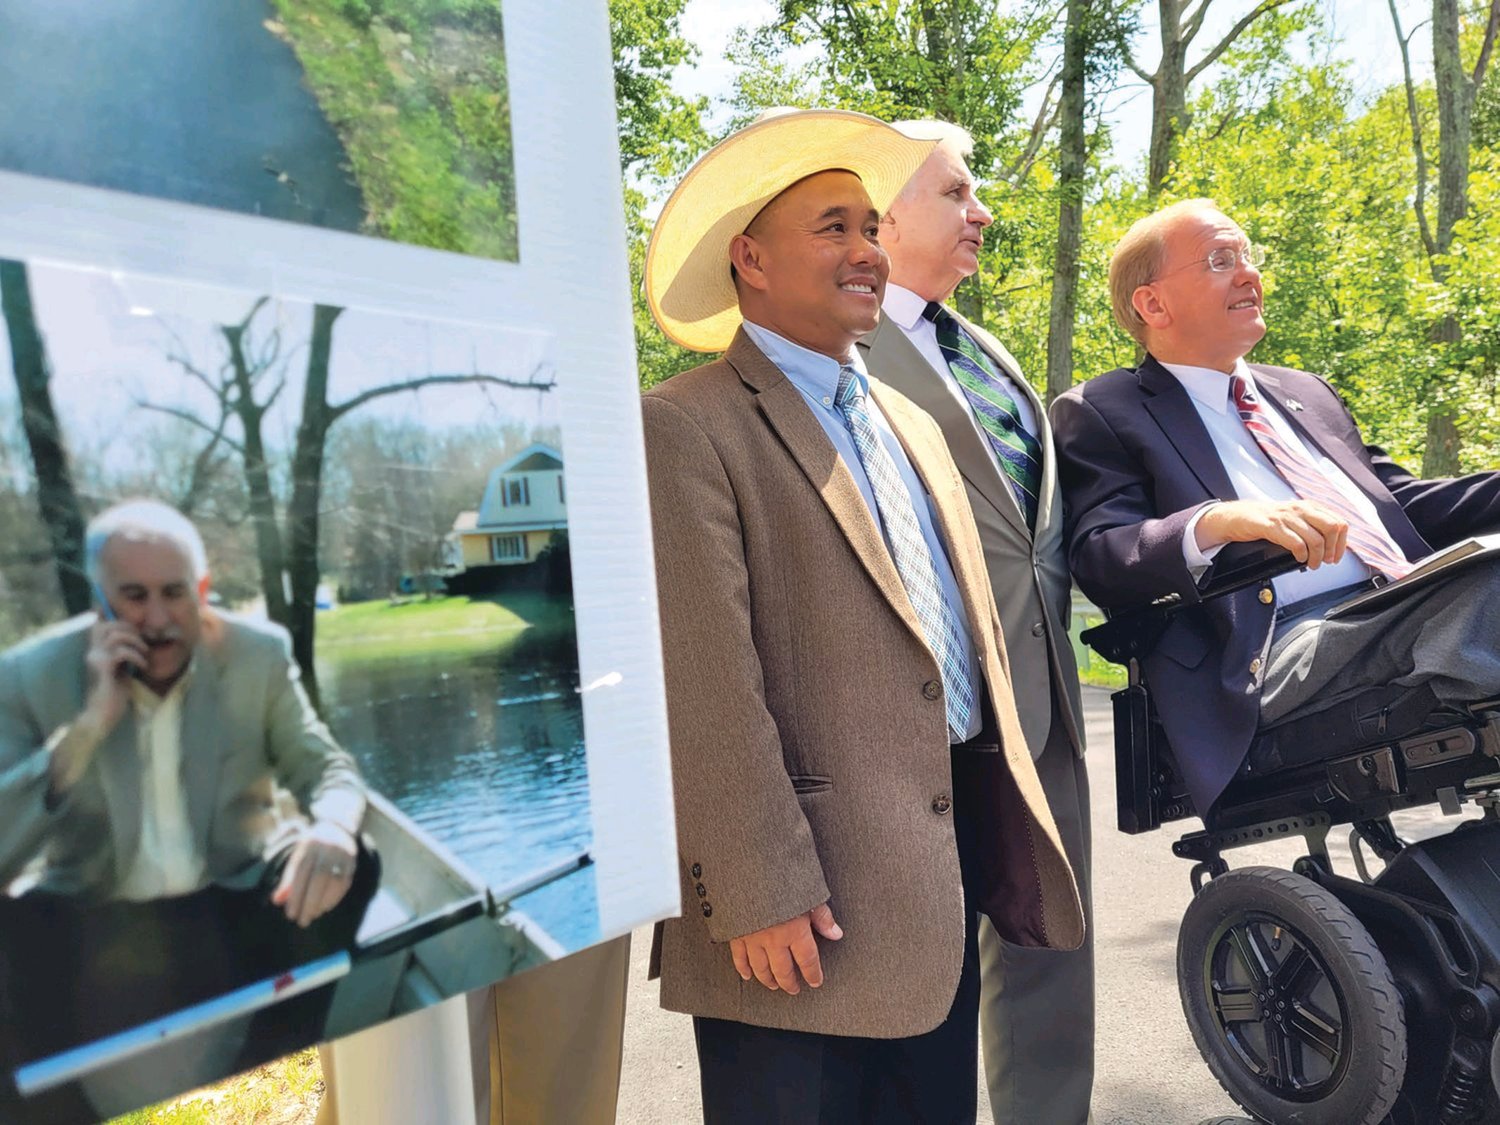 TWO IF BY SEA: In August, Phou Vongkhamdy, U.S. Sen. Jack Reed and U.S. Rep.
James Langevin stand near a poster, featuring a photo of Johnston Mayor Joseph M.
Polisena in a boat.